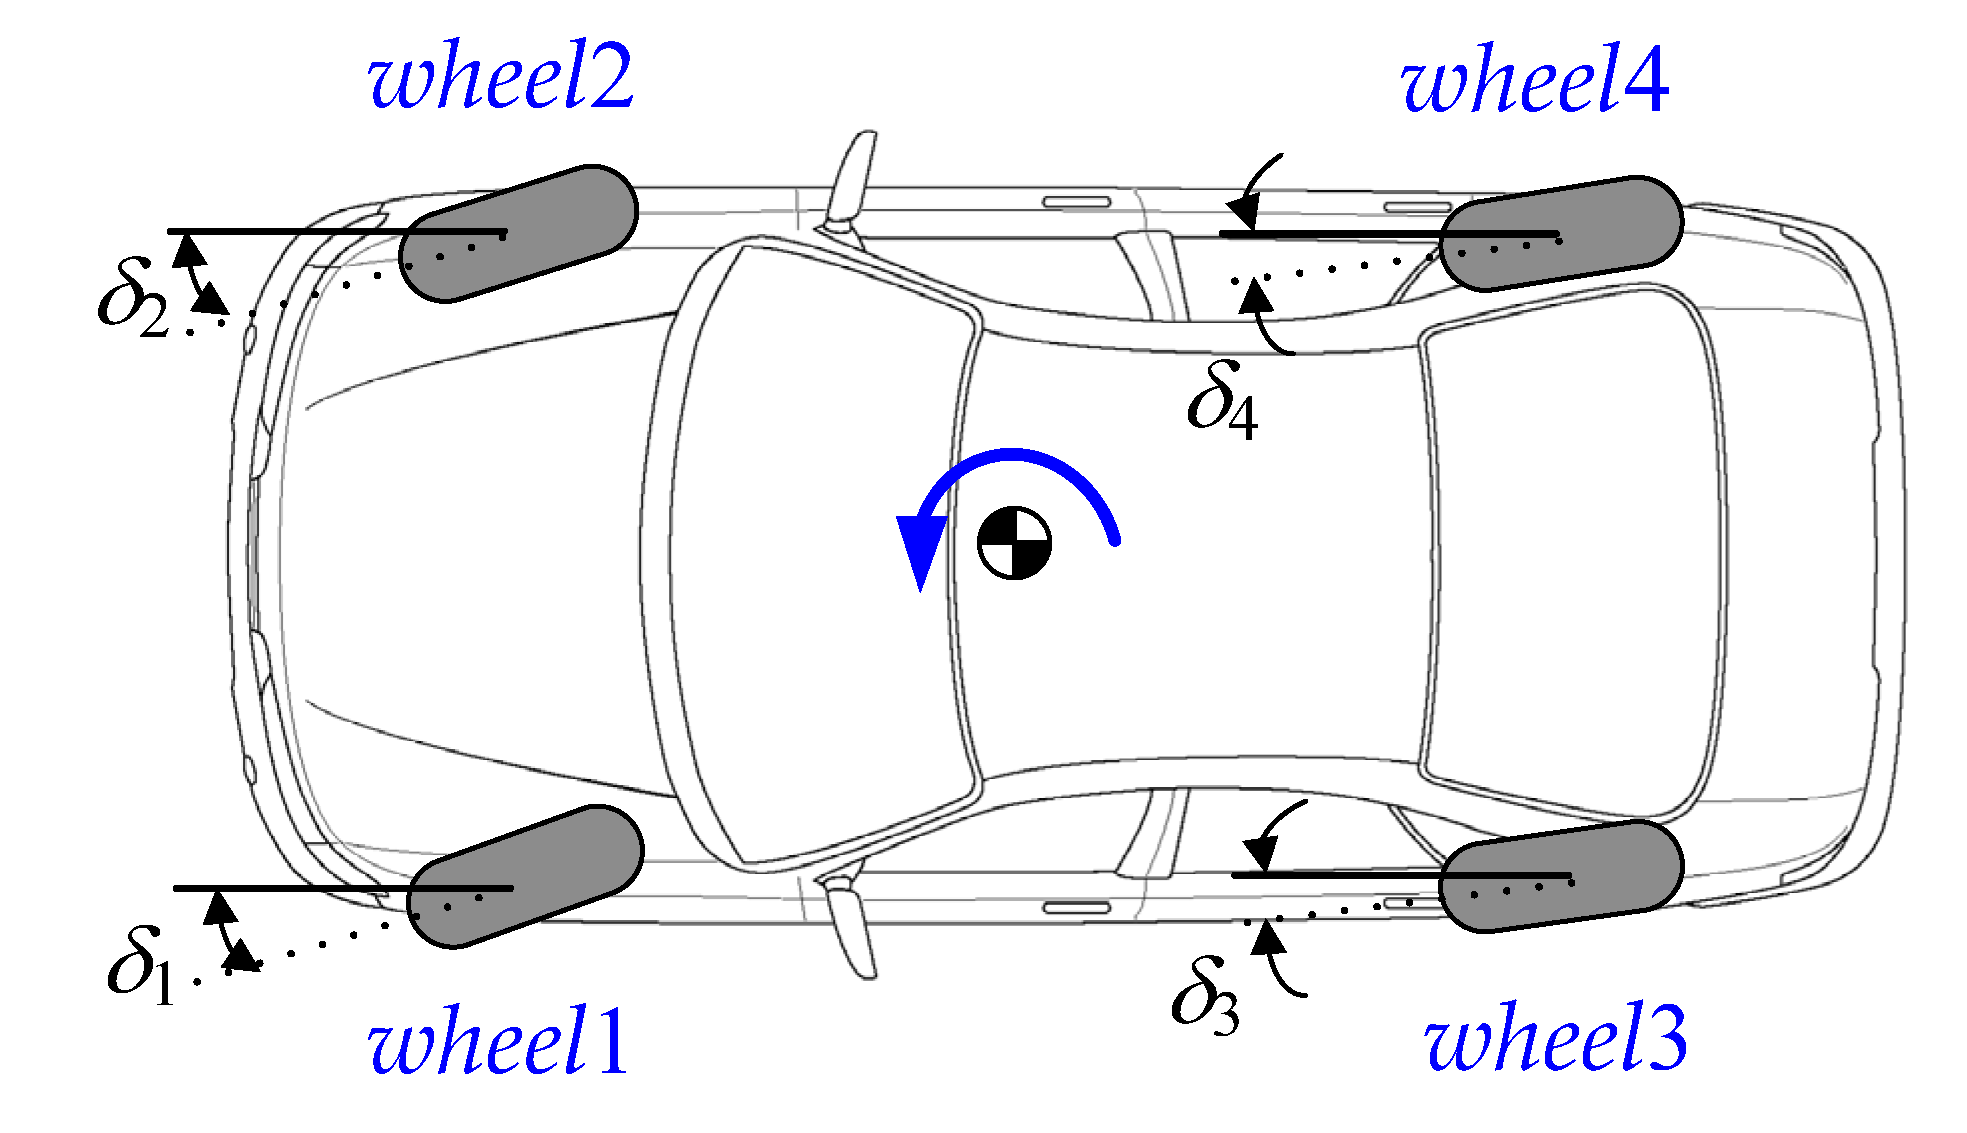 Vehicle stability control systems: An overview of the integrated system  that enhances braking, traction and skid control, 2012-02-24